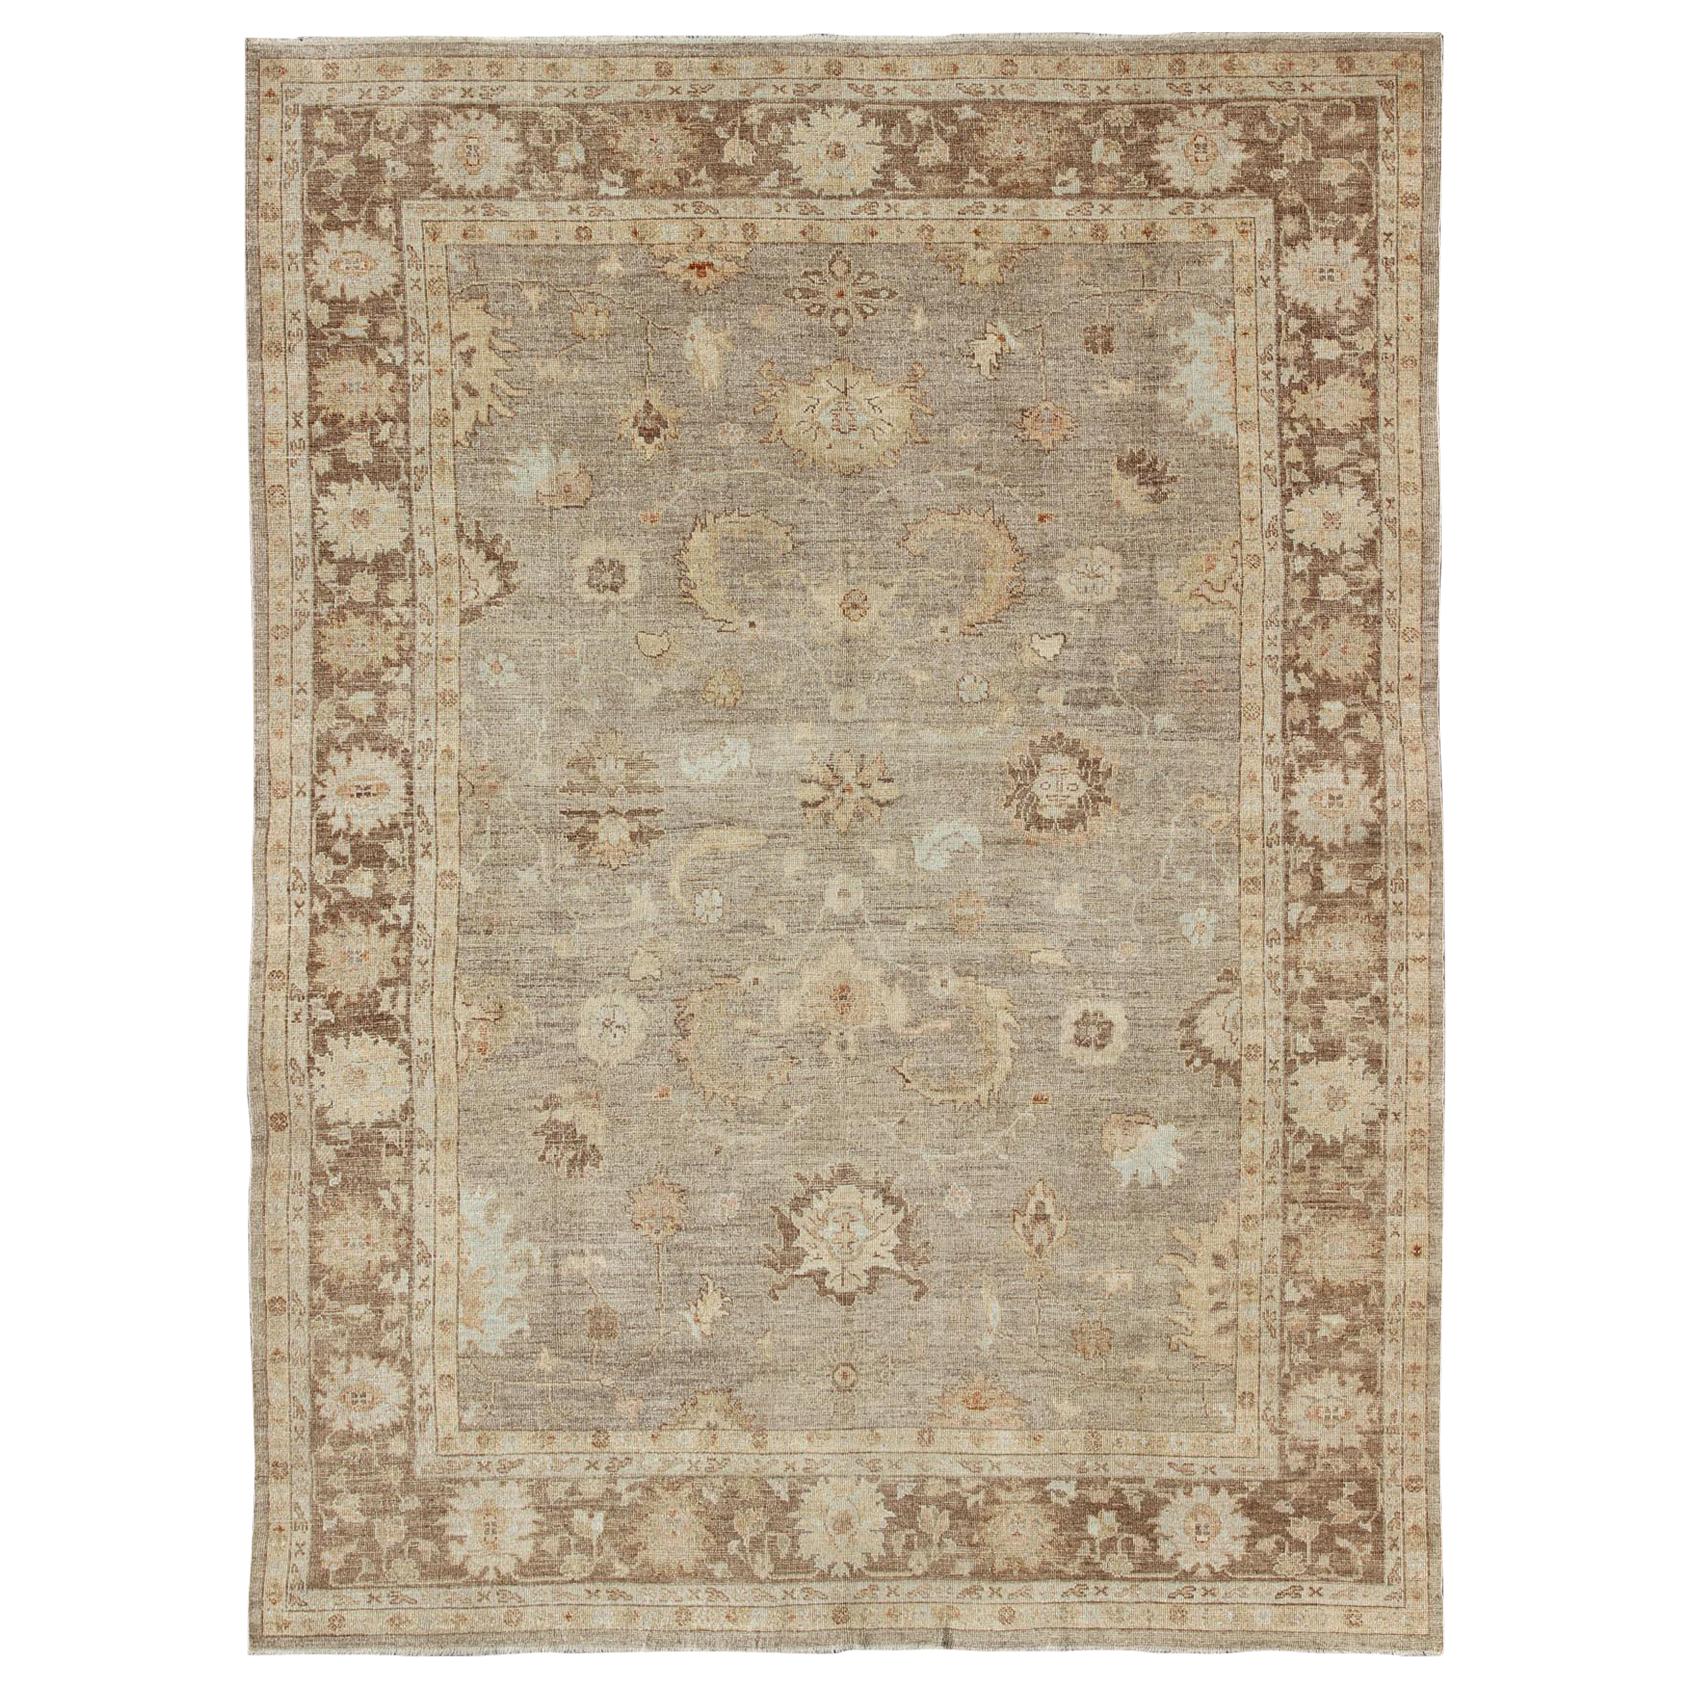 Angora Oushak Turkish Rug in Warm Colors of Taupe, Gray, Brown, Cream